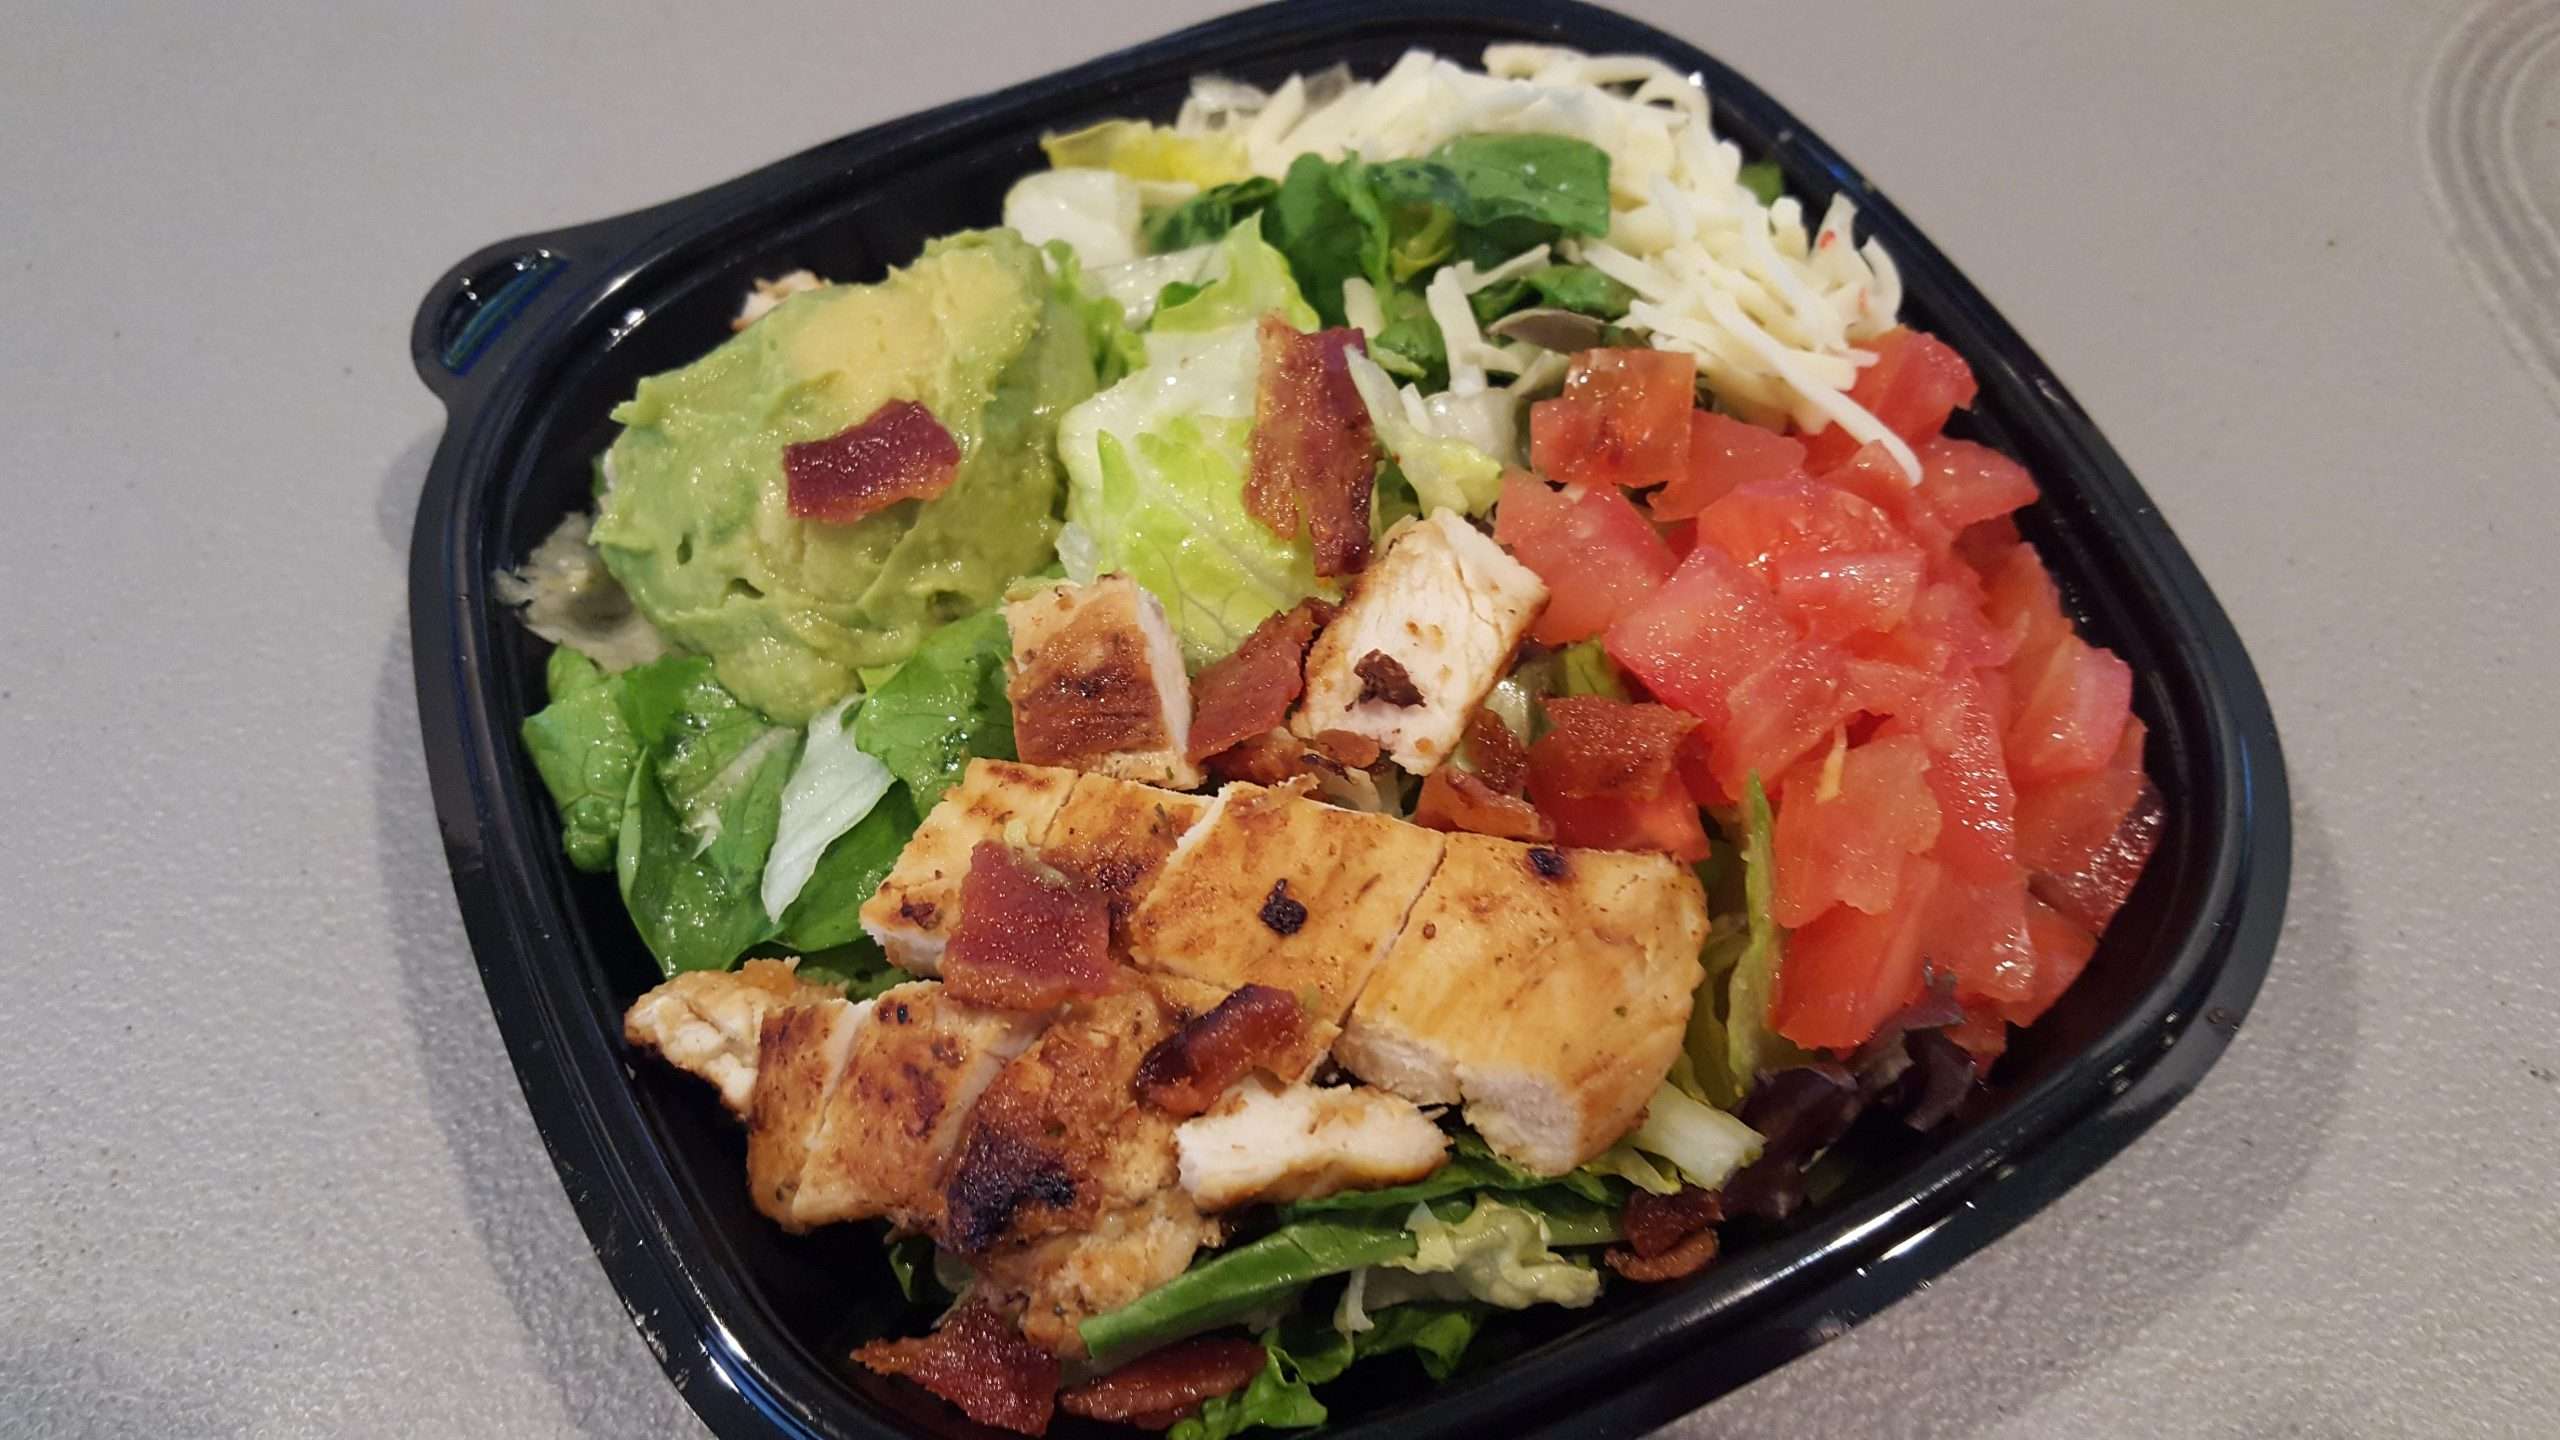 This Southwest Avocado Chicken Salad from Wendy